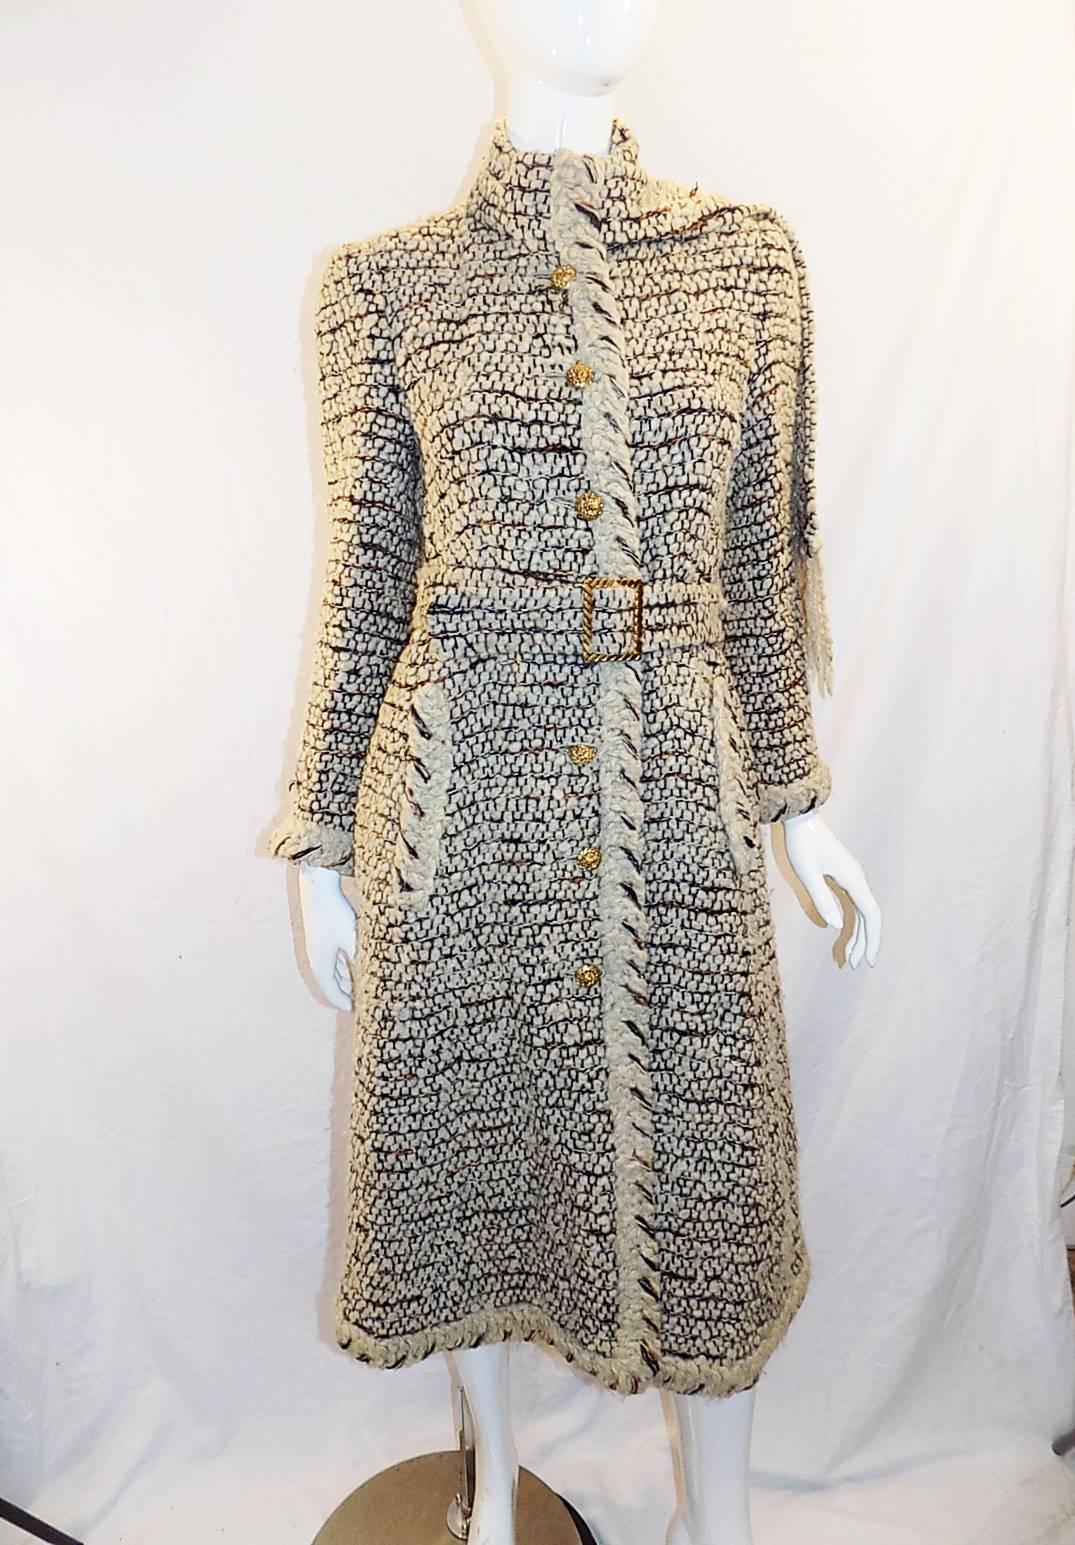 This is truly spectacular wool knit buckle  coat Chanel Haute Couture 1979. Special order in Paris for one of my clients. Original receipt is included from Chanel atelier in Paris.  So beautiful and evergreen. It will never go out of style.